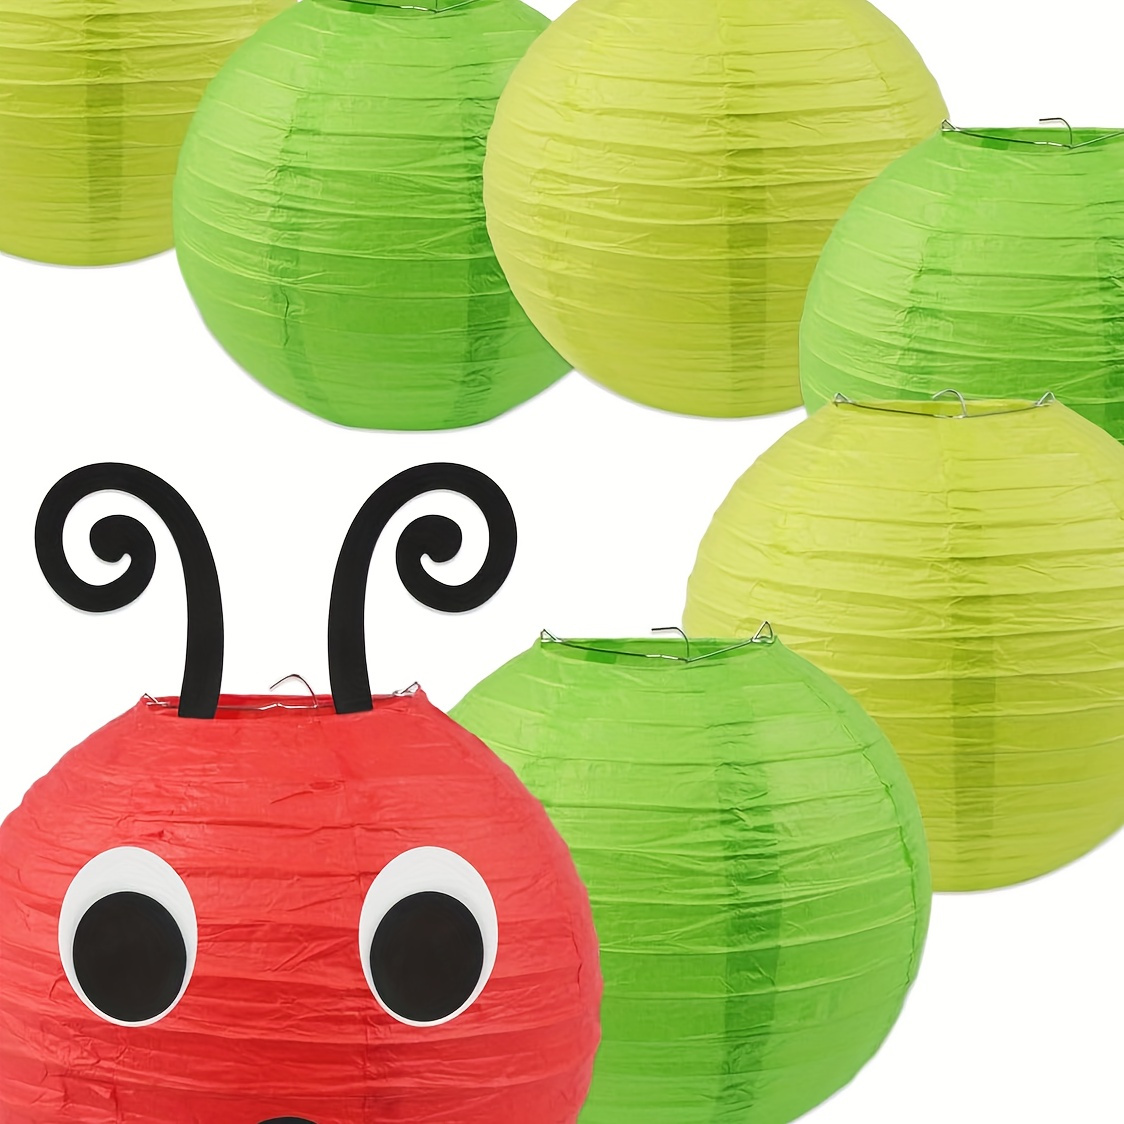 

7-piece Caterpillar Paper Lanterns Set - Red & Green With Eyes And Mouth Design For Classroom, Birthday Party Decorations